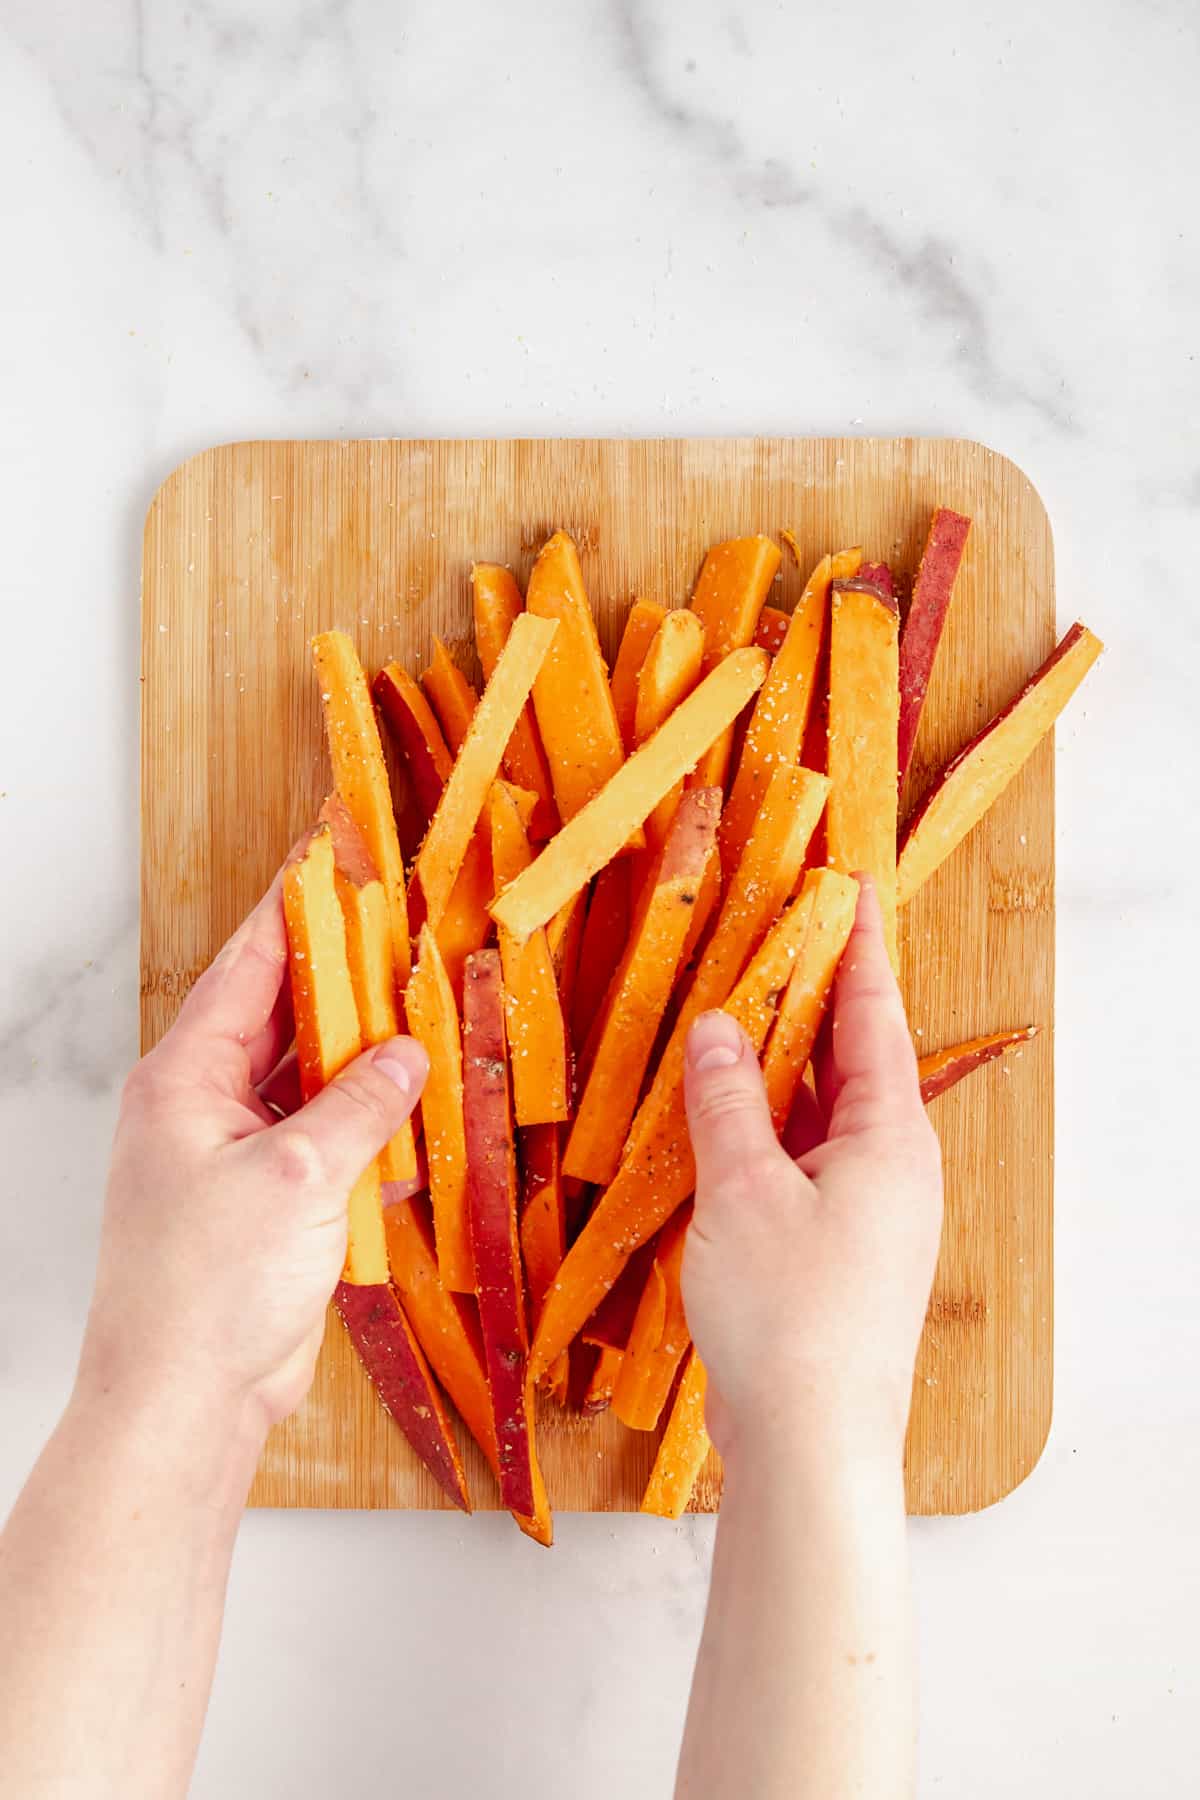 Sweet potato fries tossing with seasonings on a cutting board.